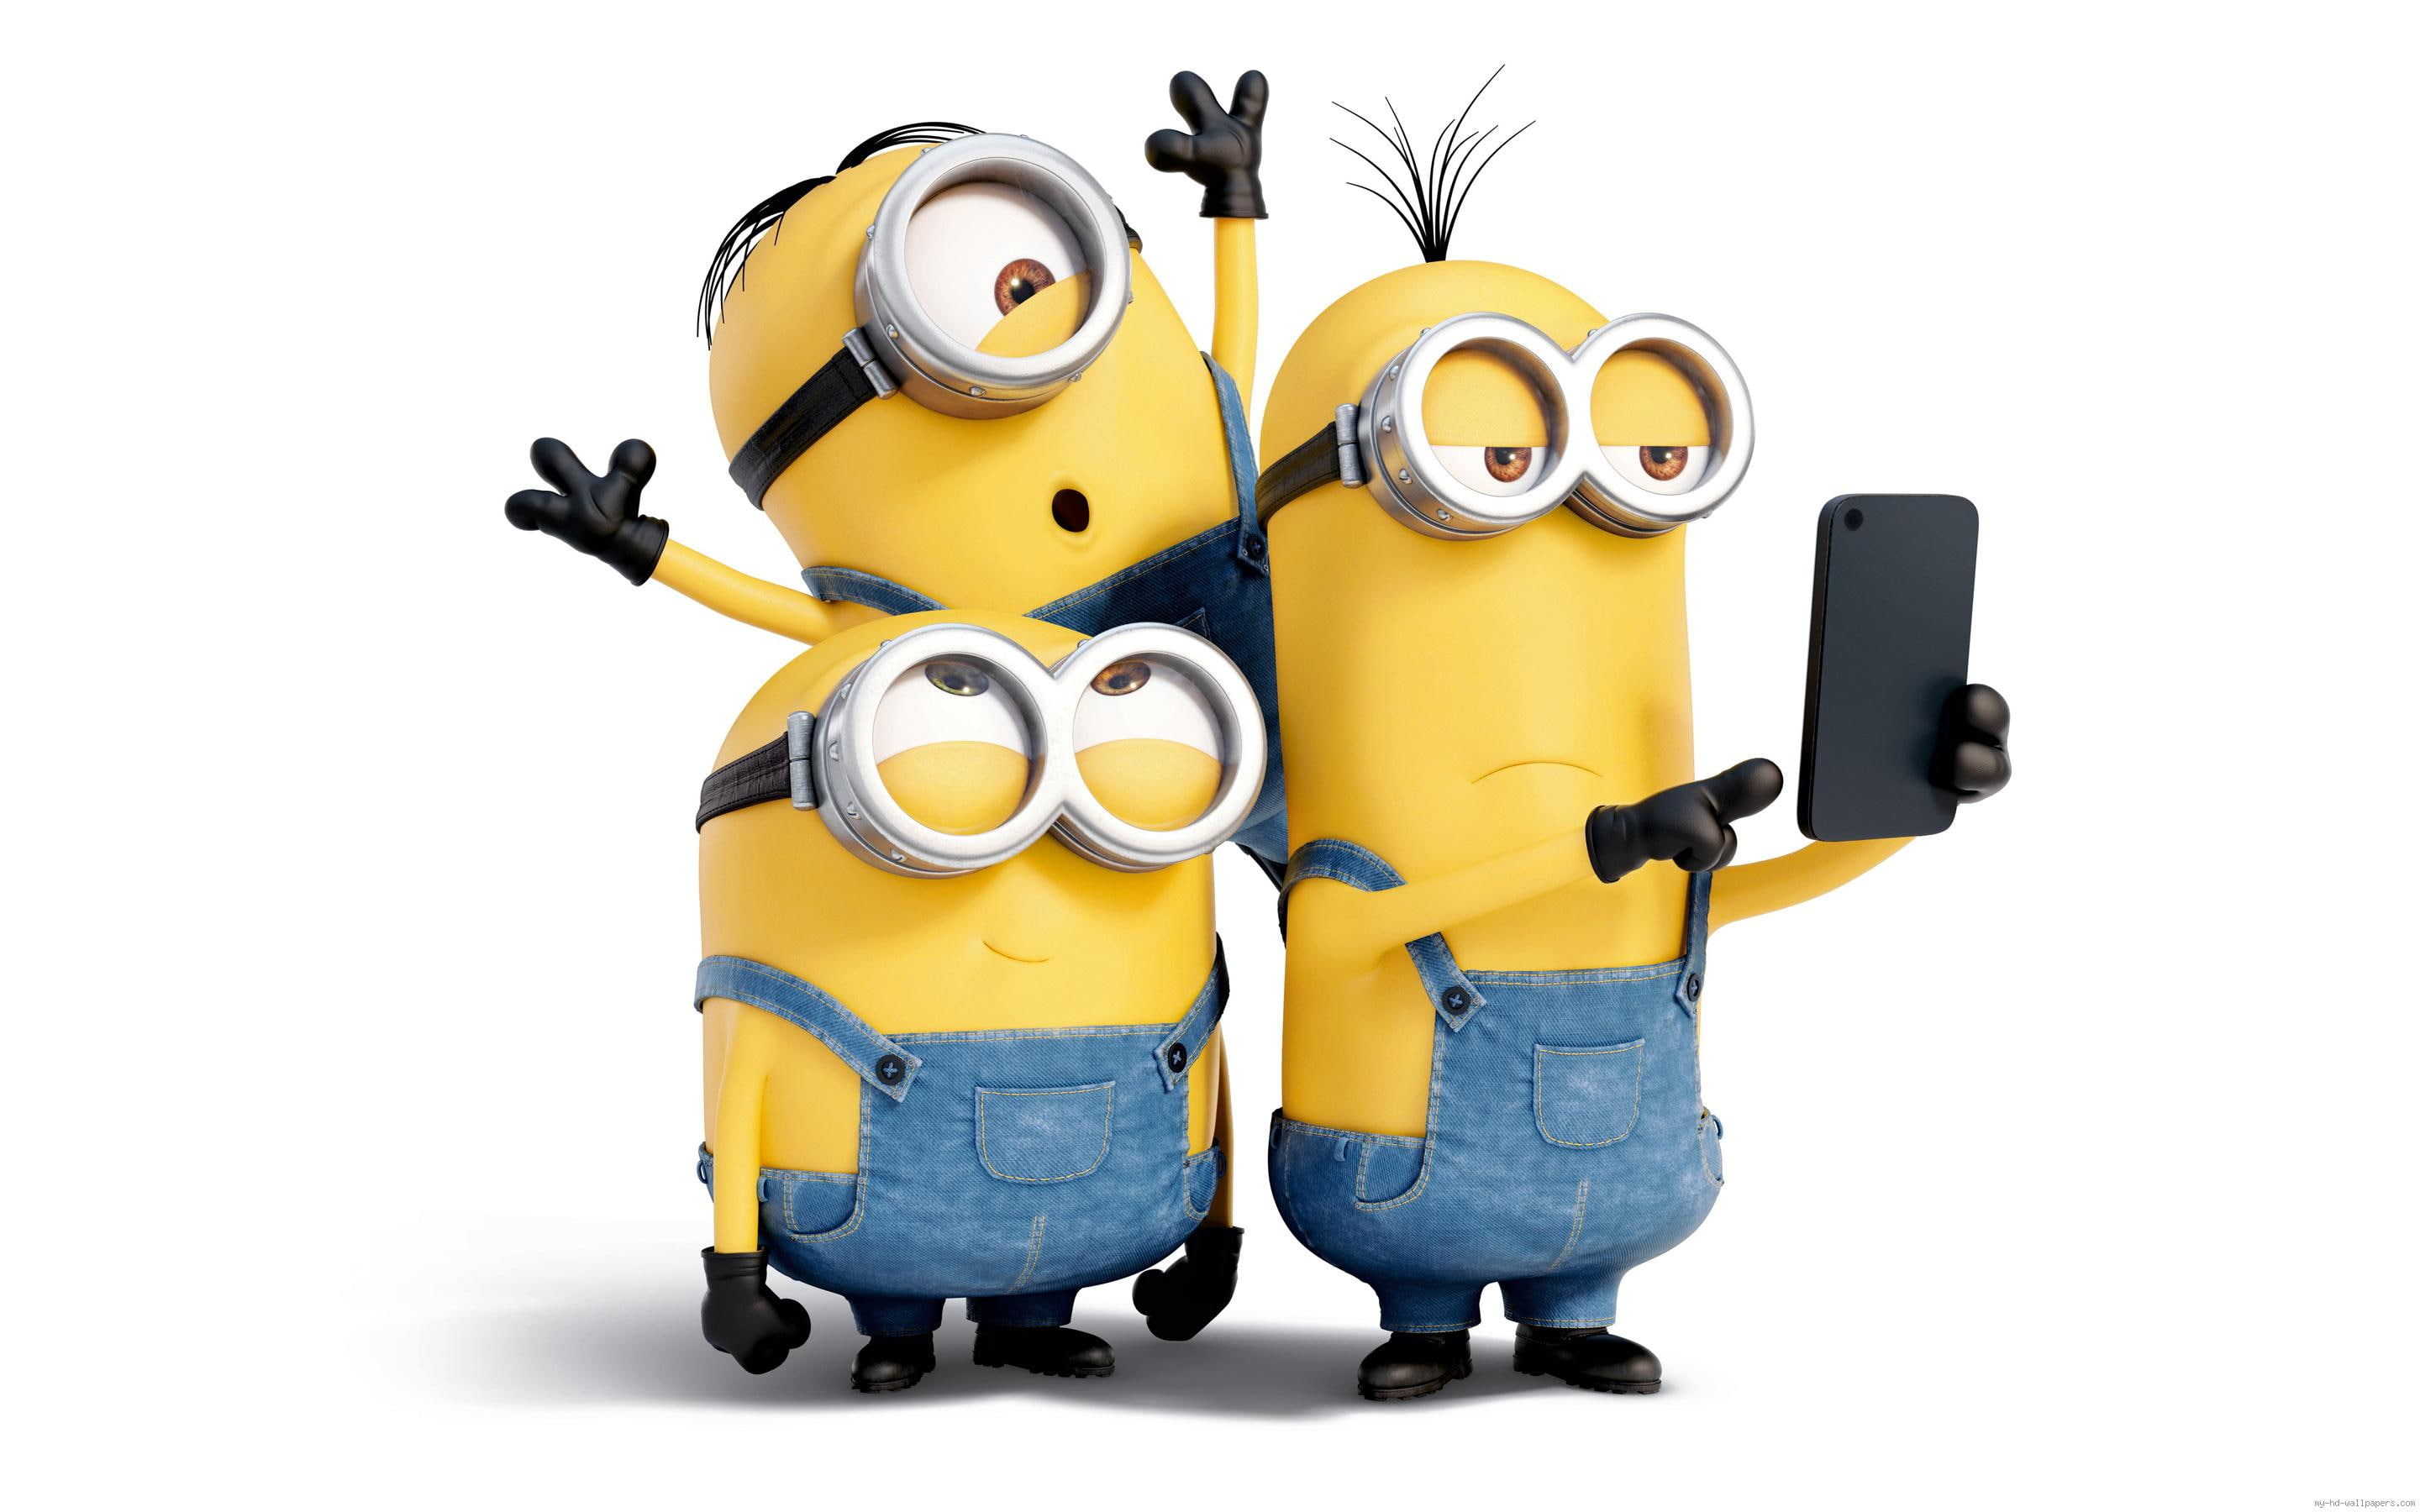 Minions with a smartphone, despicable me characters, movie, cartoon